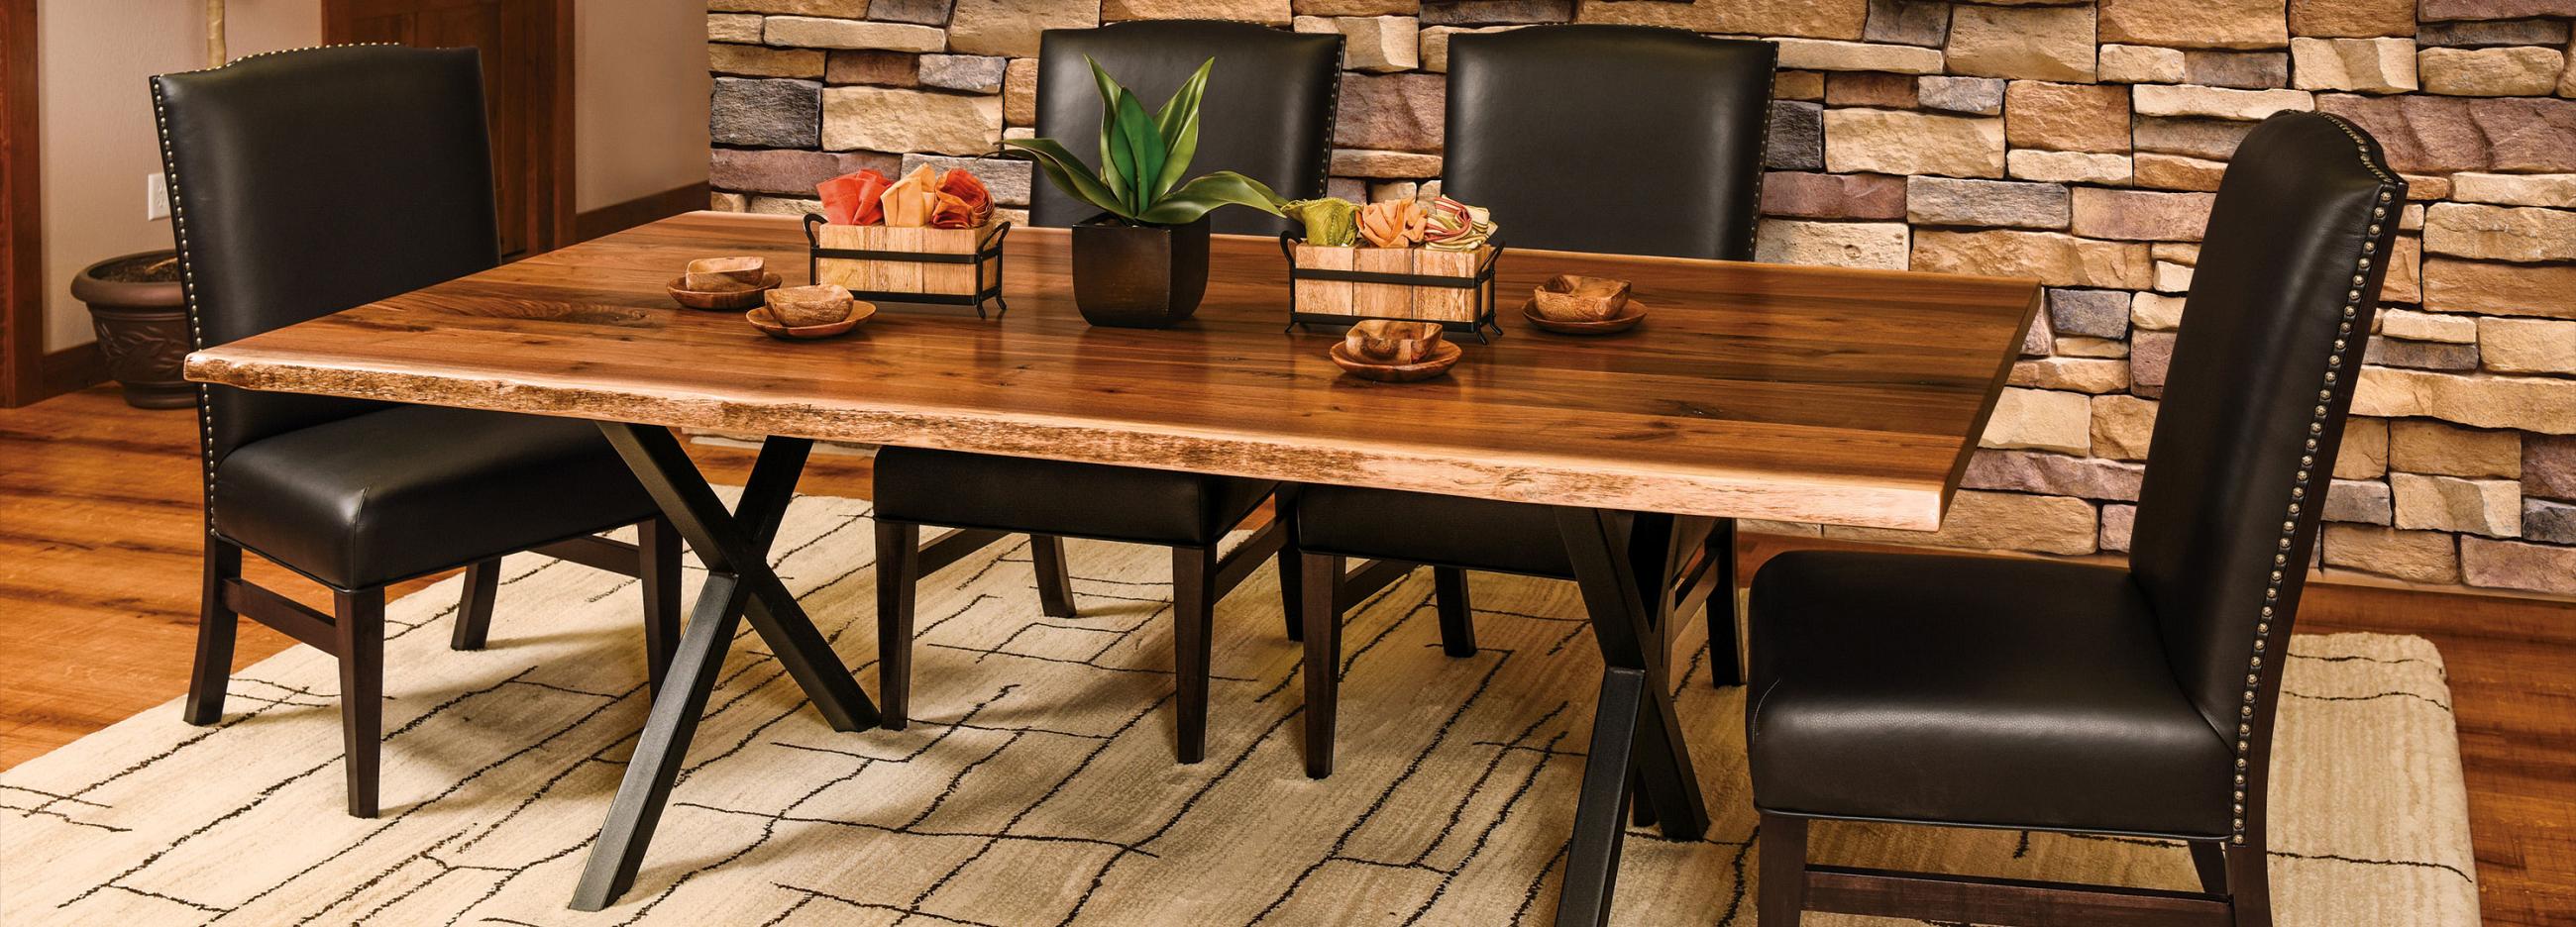 West Point Woodworking Dining Room Furniture